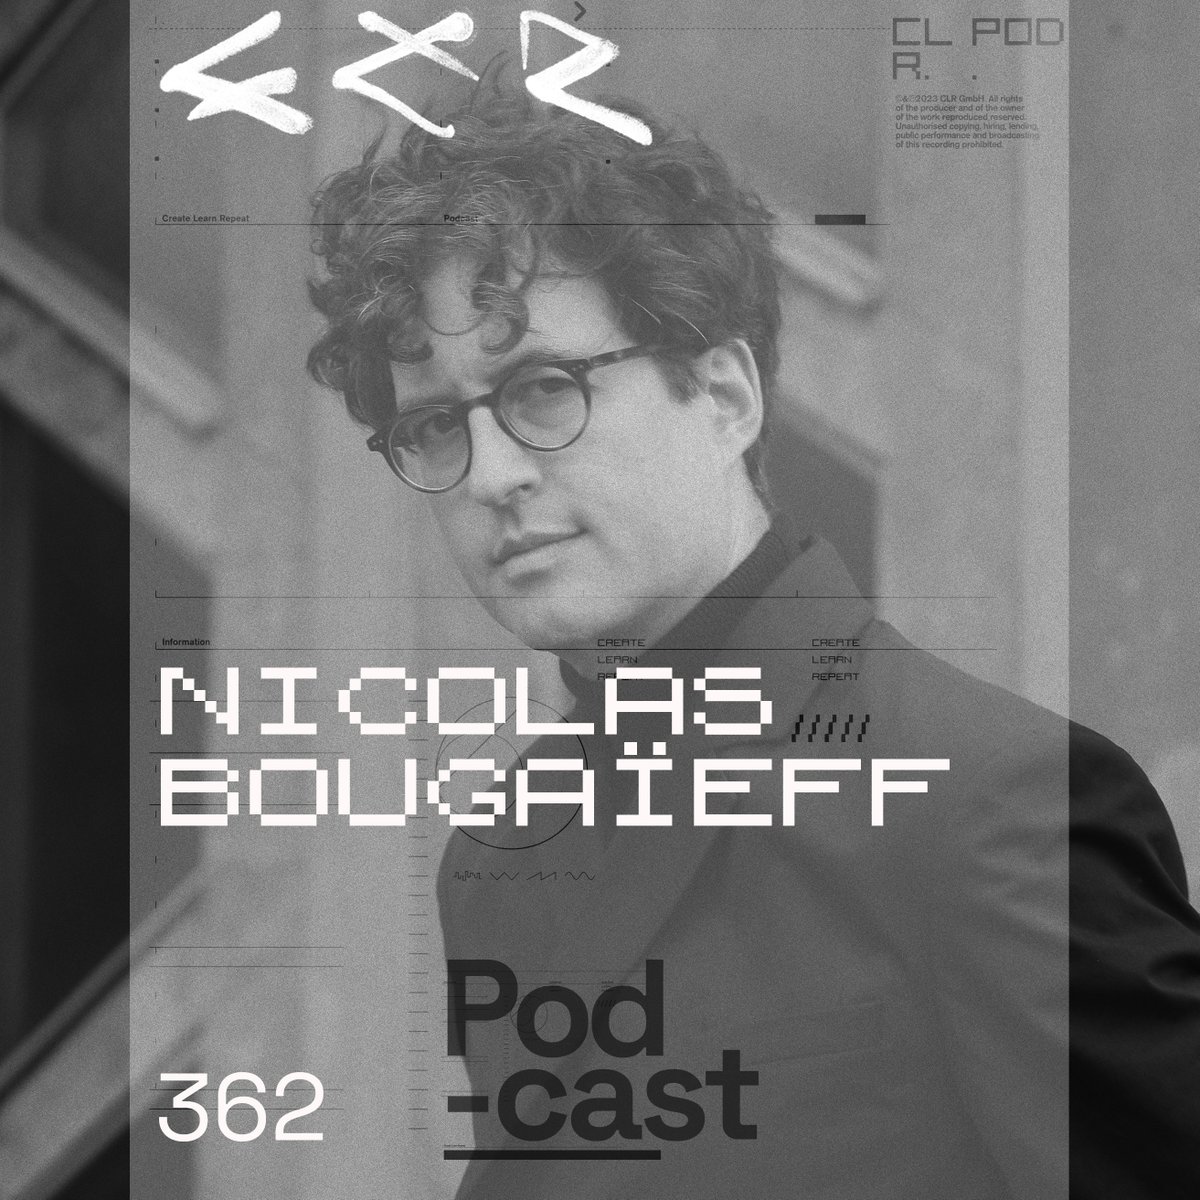 Check out @nbougaieff on CLR podcast, live now! Stream here: fanlink.to/CLRPodcast362